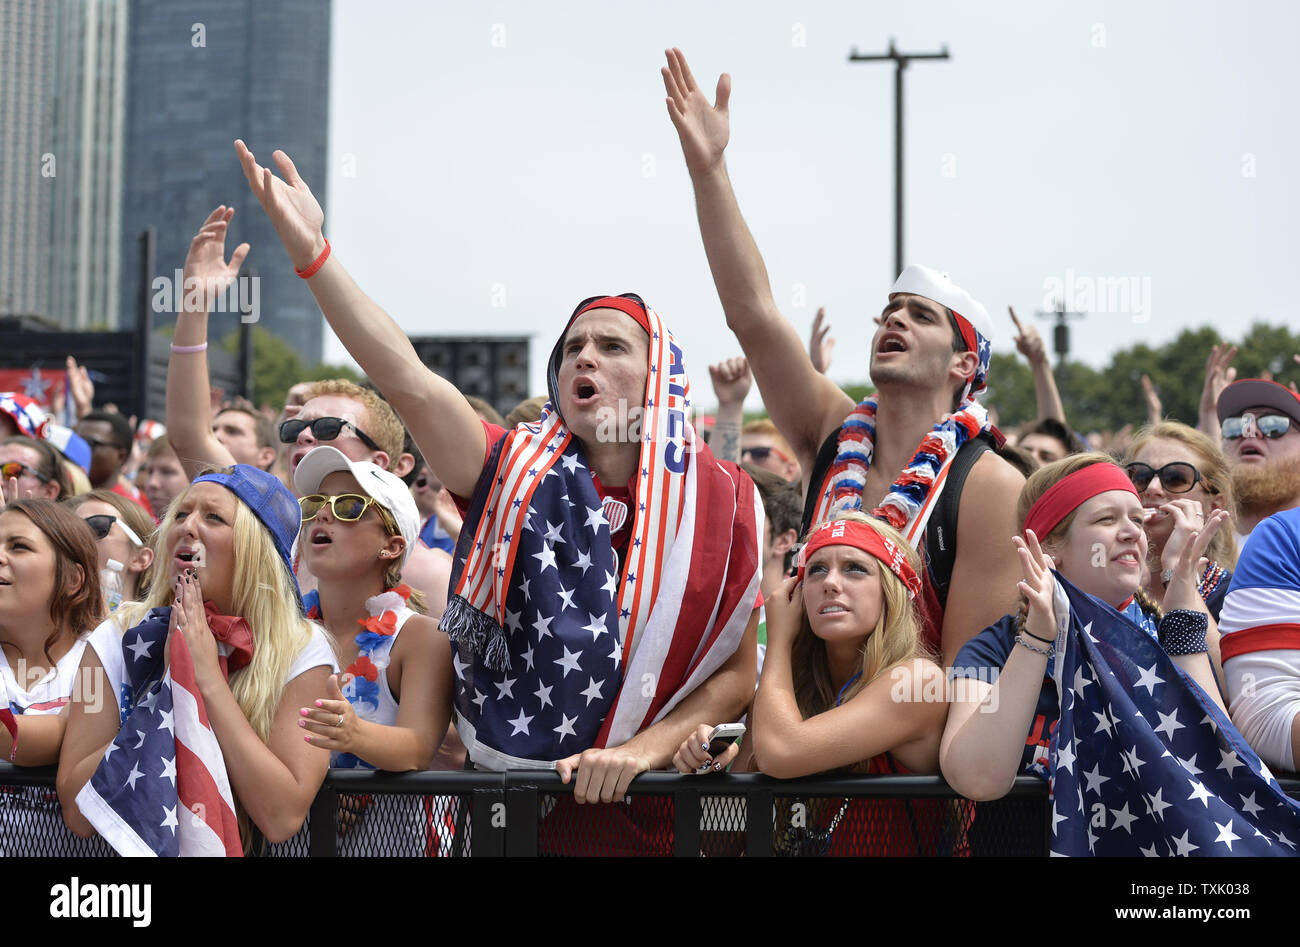 United States' soccer fans react to a call during the World Cup match between the United States and Germany at a World Cup watch event hosted by U.S. Soccer at Grant Park on June 26, 2014 in Chicago. The United States lost to Germany 1-0, but advanced to the World Cup round of 16 with a Portugal win over Ghana in their group.    UPI/Brian Kersey Stock Photo